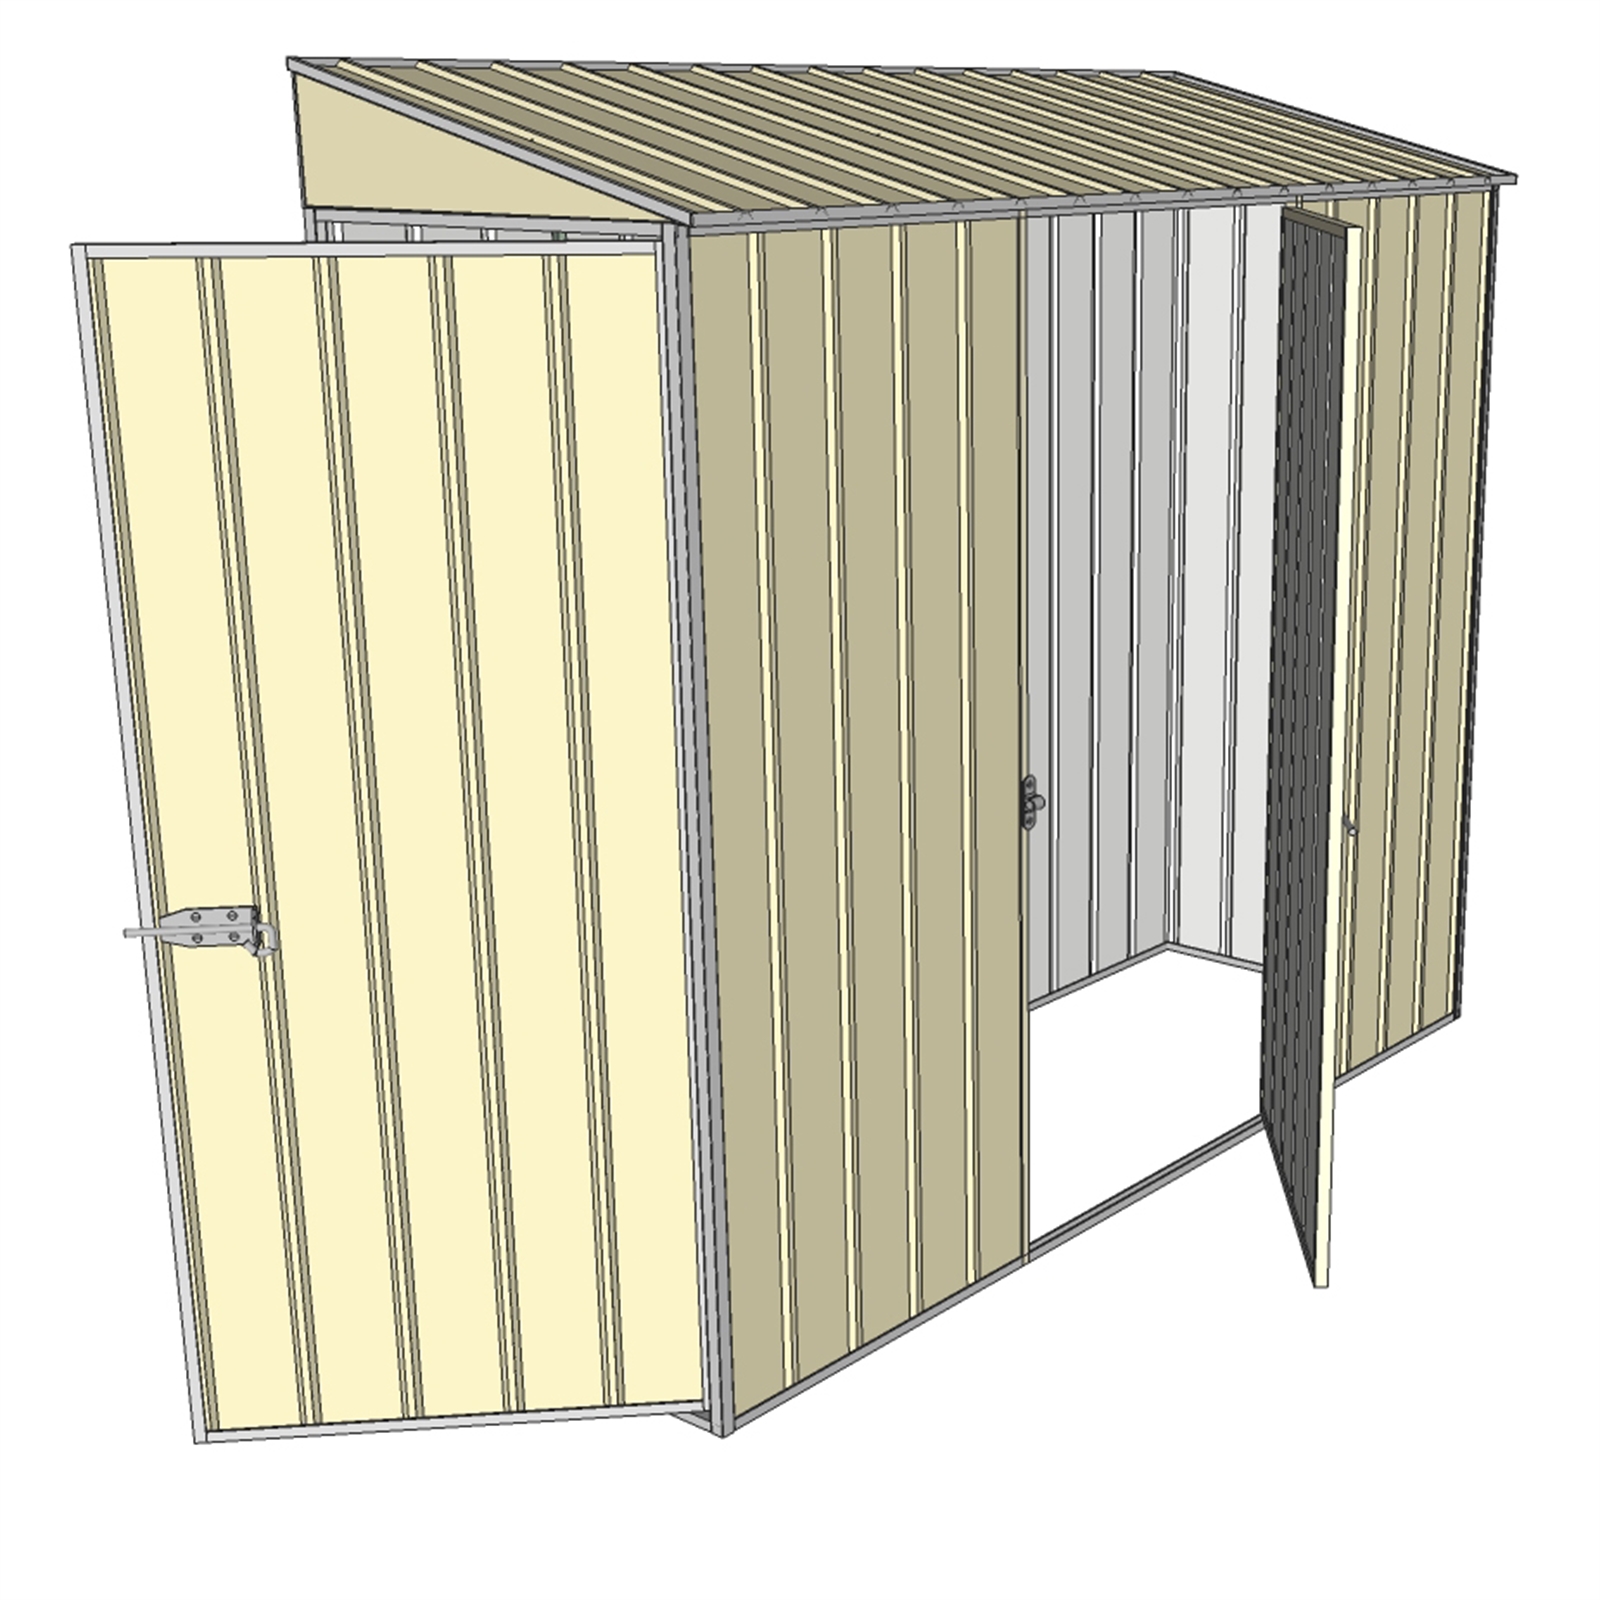 Build-a-Shed 2.3 x 0.8 x 2.0m Cream Skillion Two Single Hinged Doors Narrow Shed